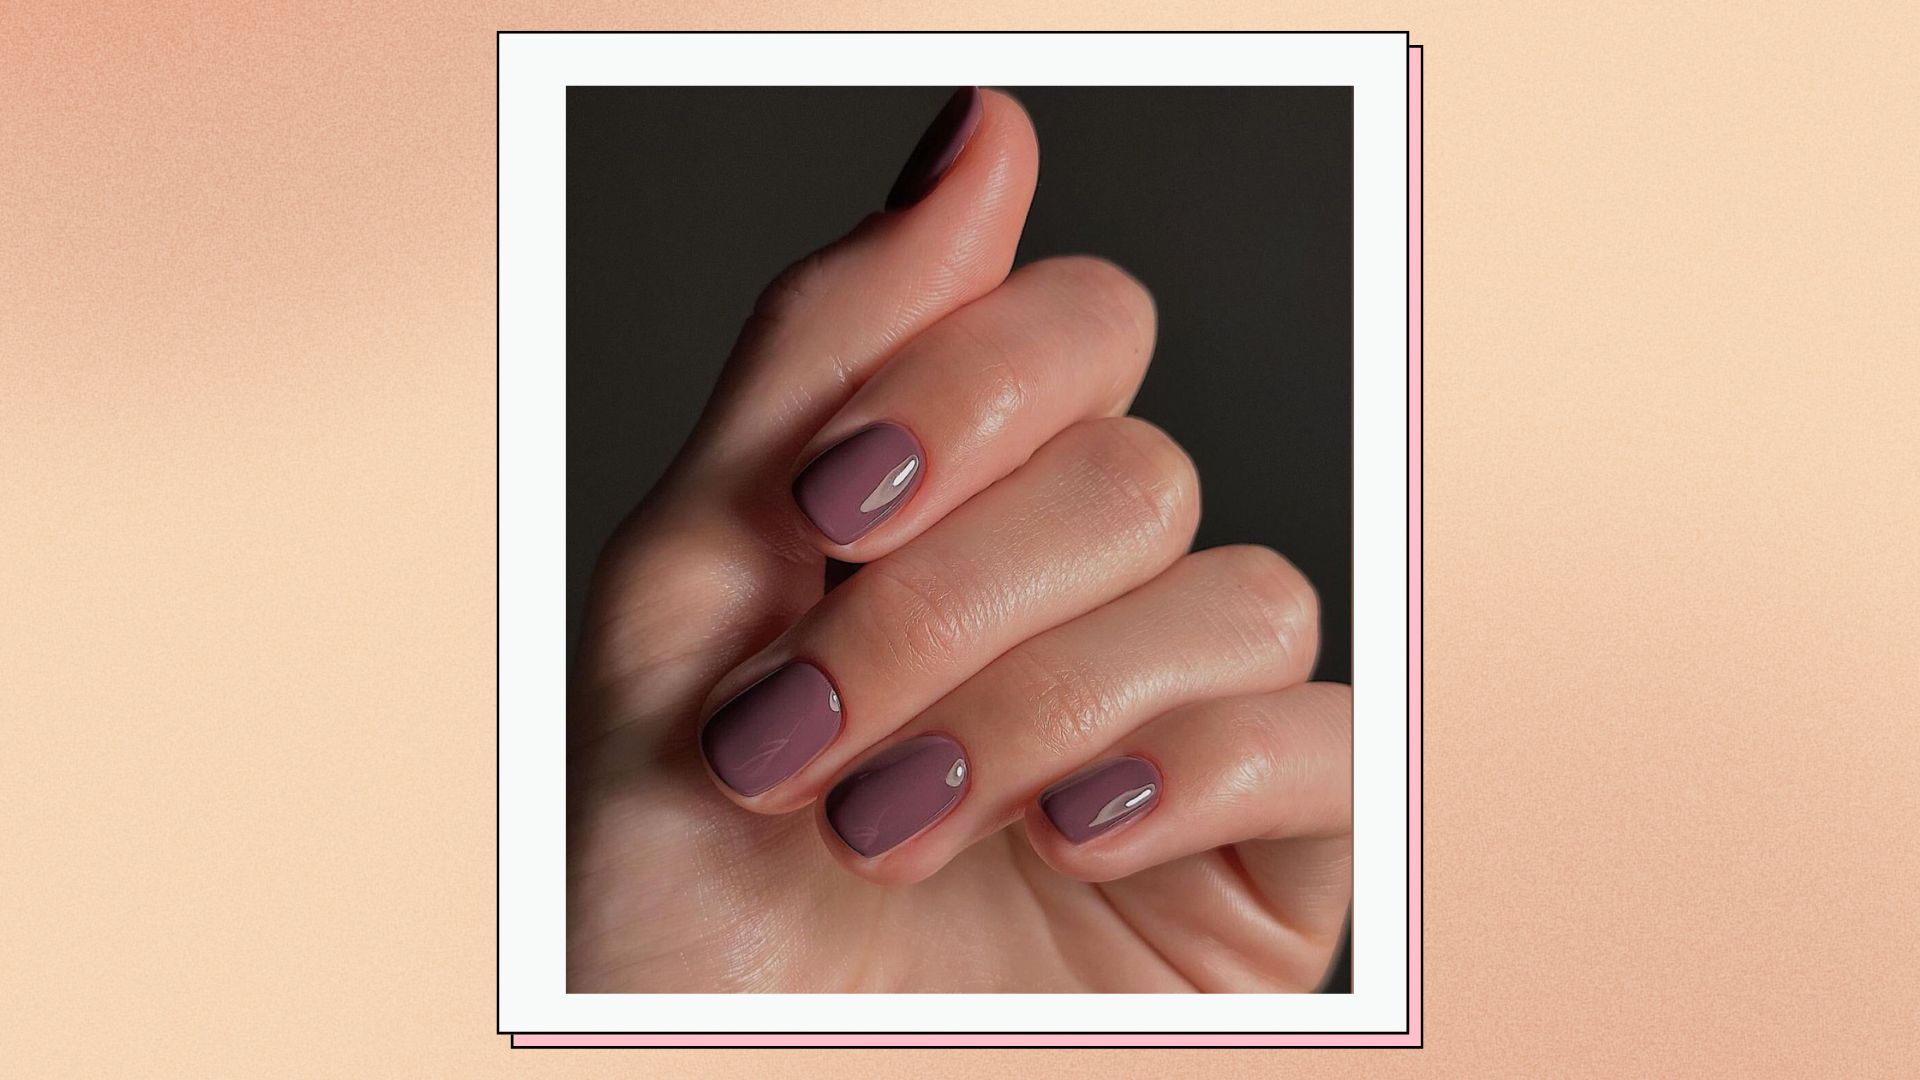 The new natural nail trend  The 'quiet luxury' manicure movement